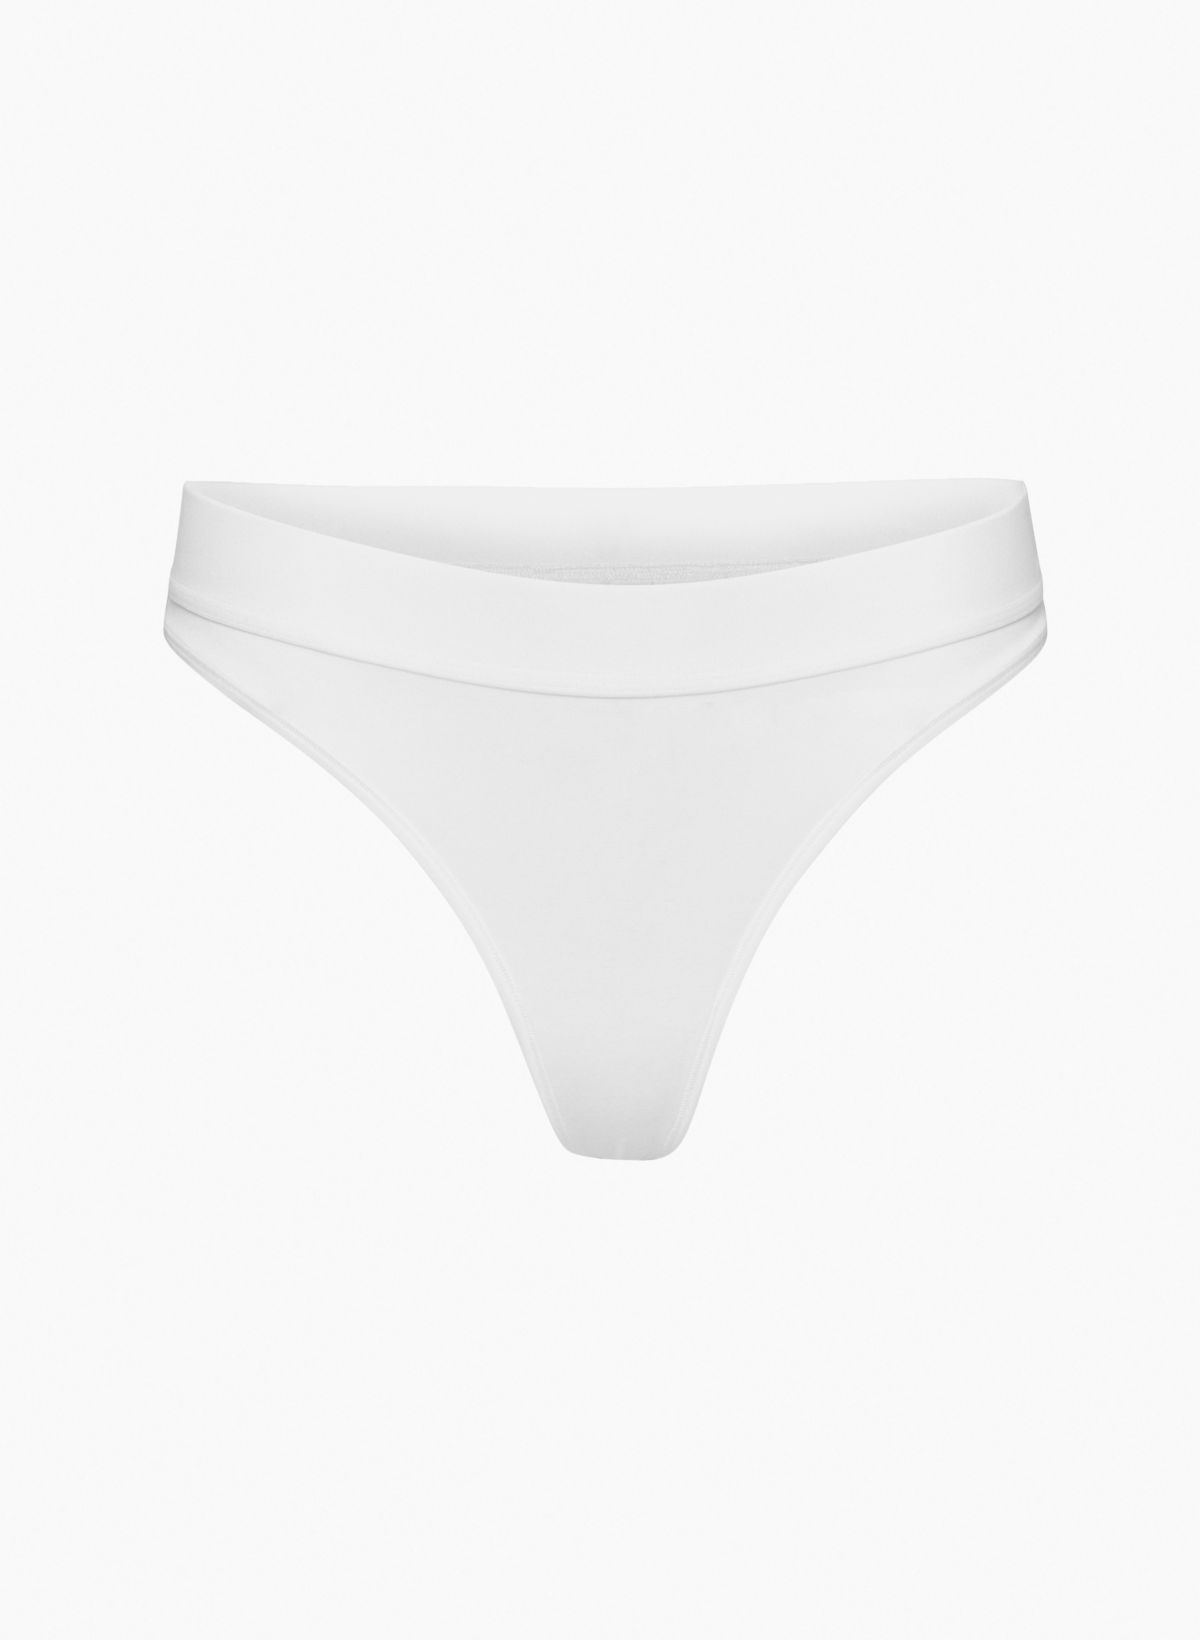 Bare The Easy Everyday Cotton Thong & Reviews